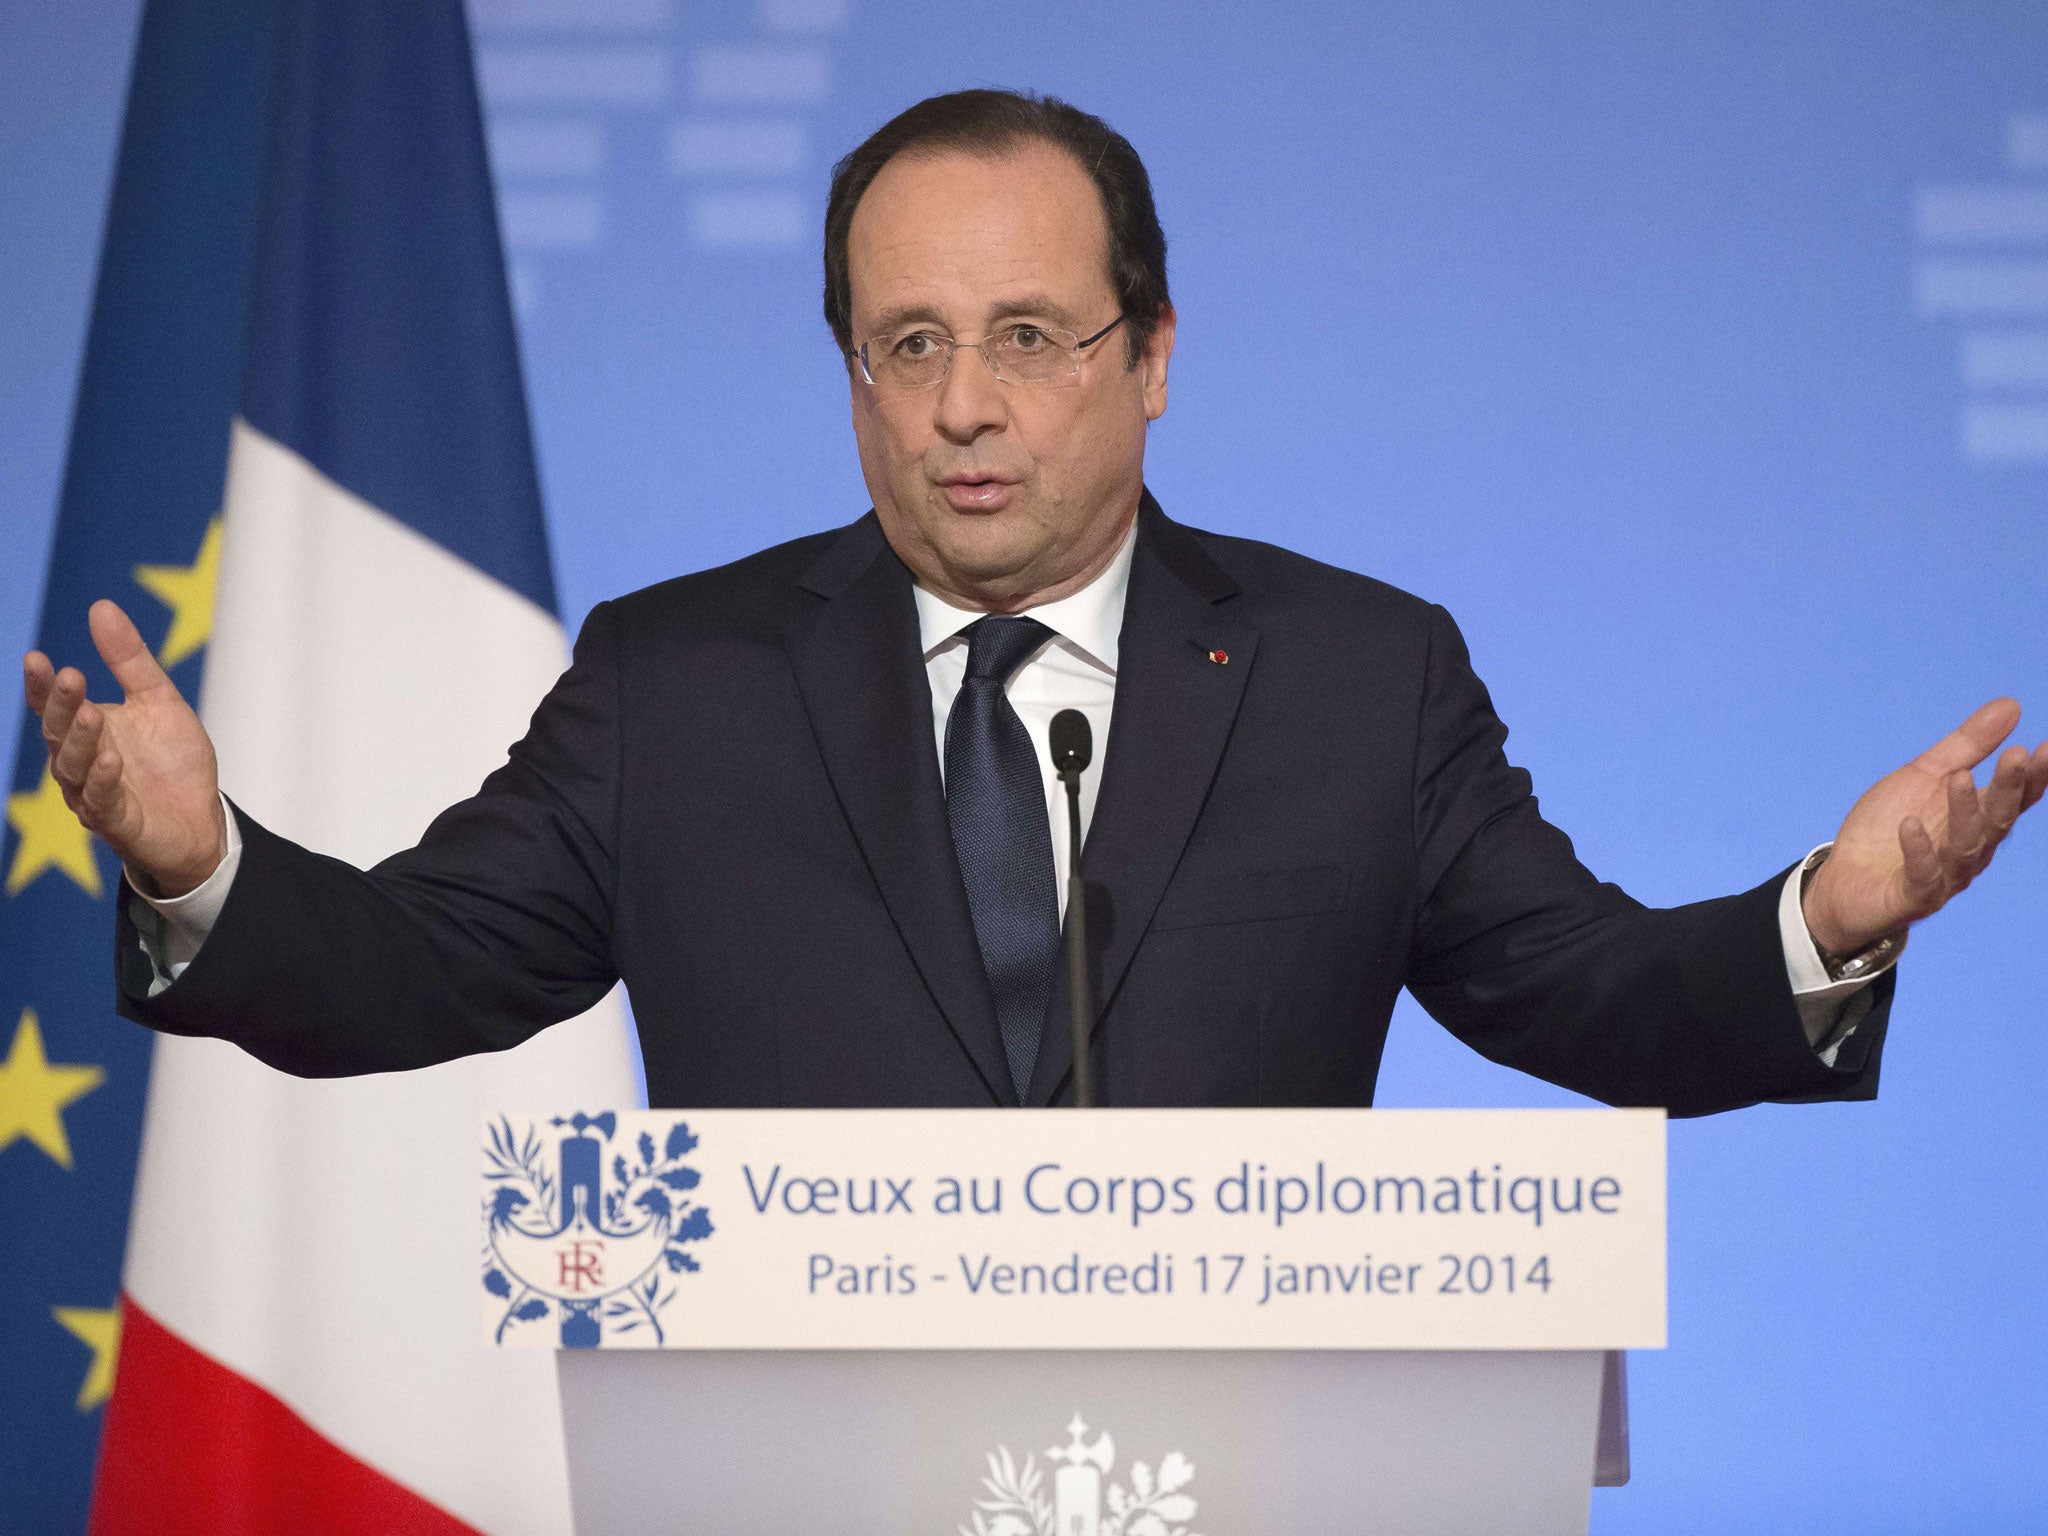 Hollande triumphed against the odds at a press conference this week